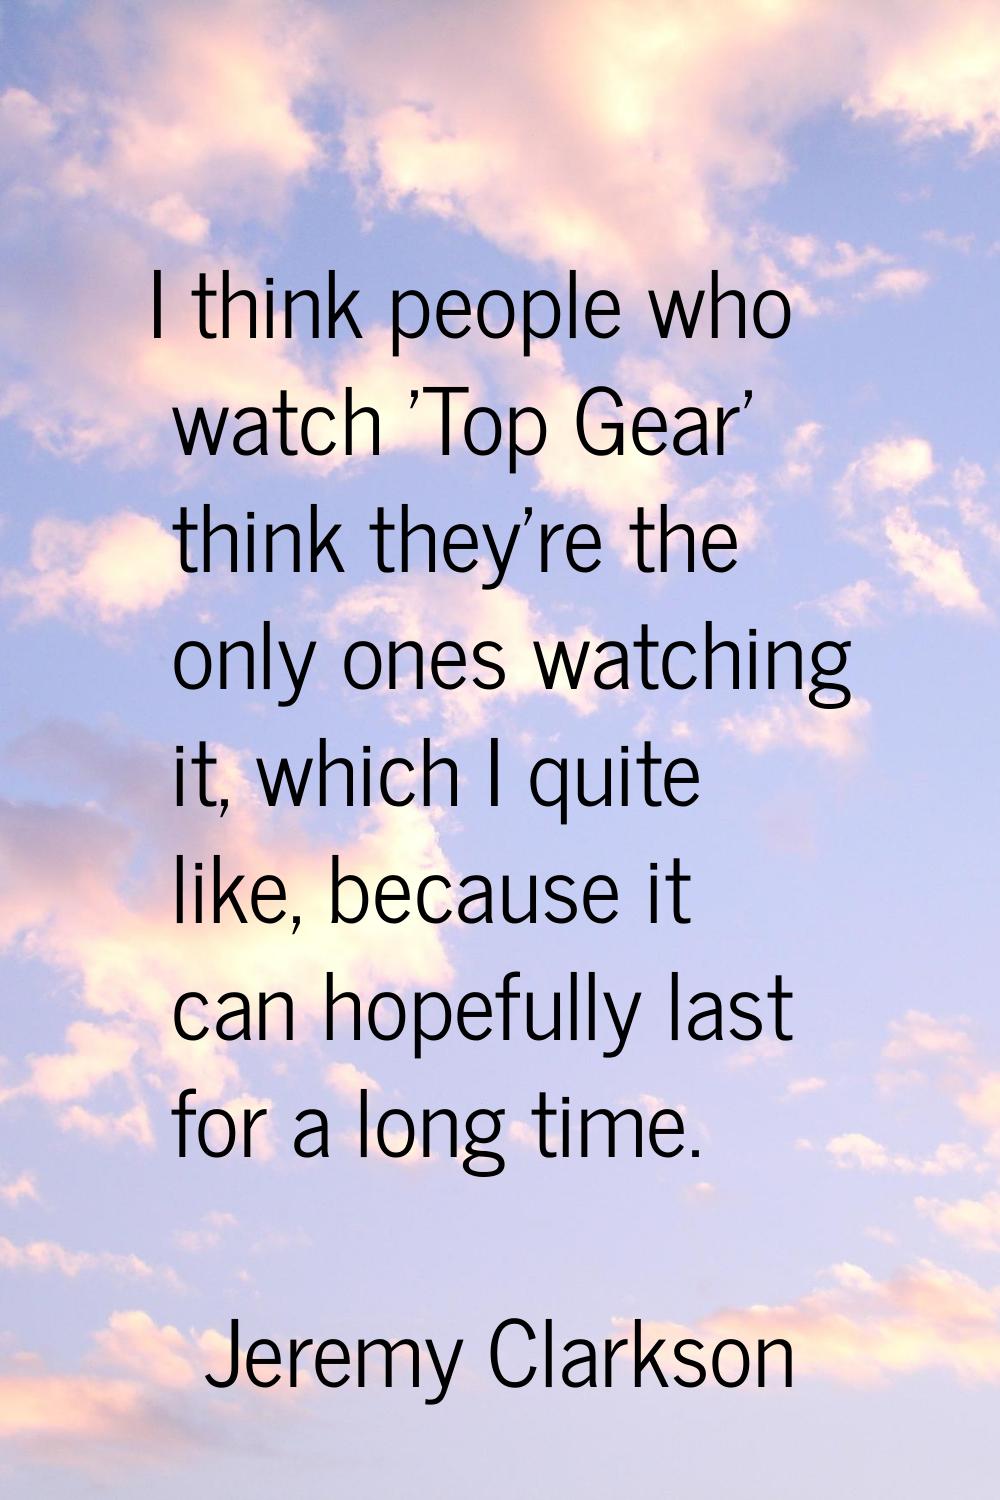 I think people who watch 'Top Gear' think they're the only ones watching it, which I quite like, be